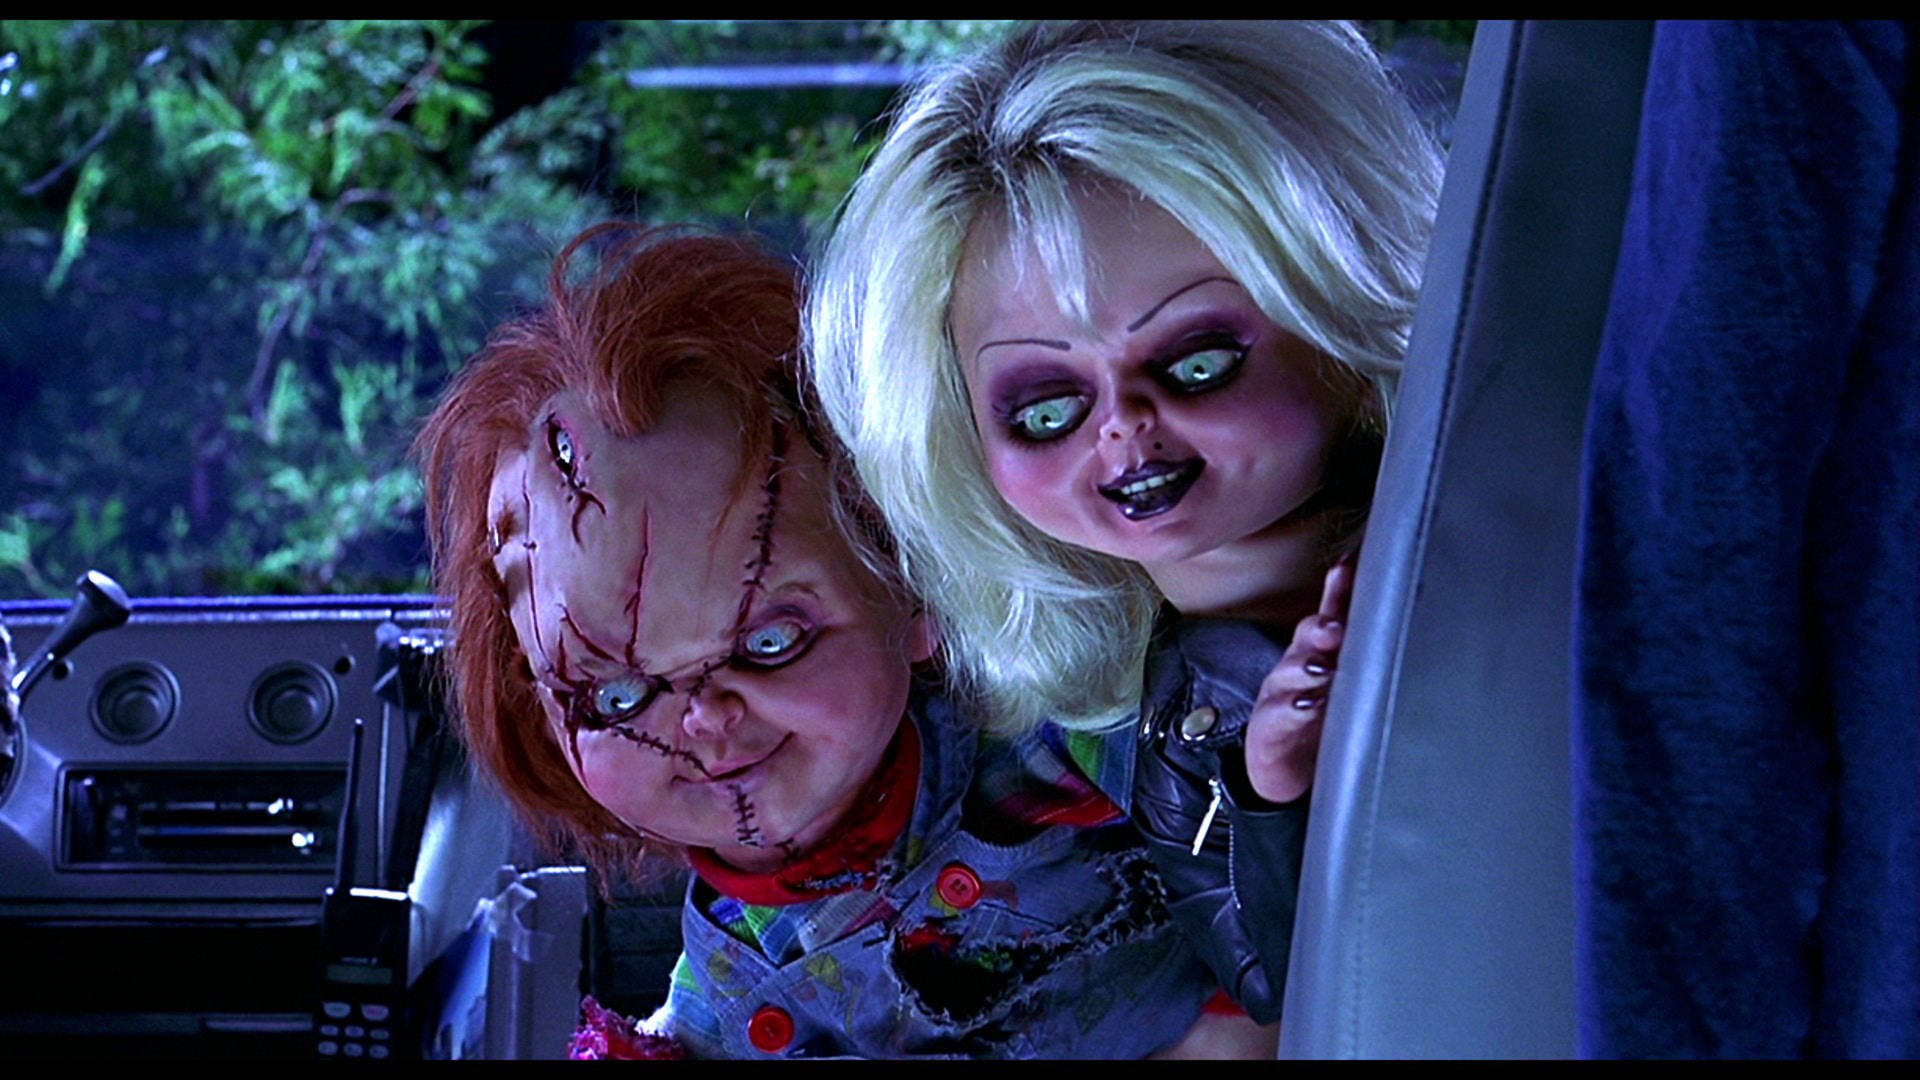 Child's Play Chucky And Tiffany In Car Wallpaper